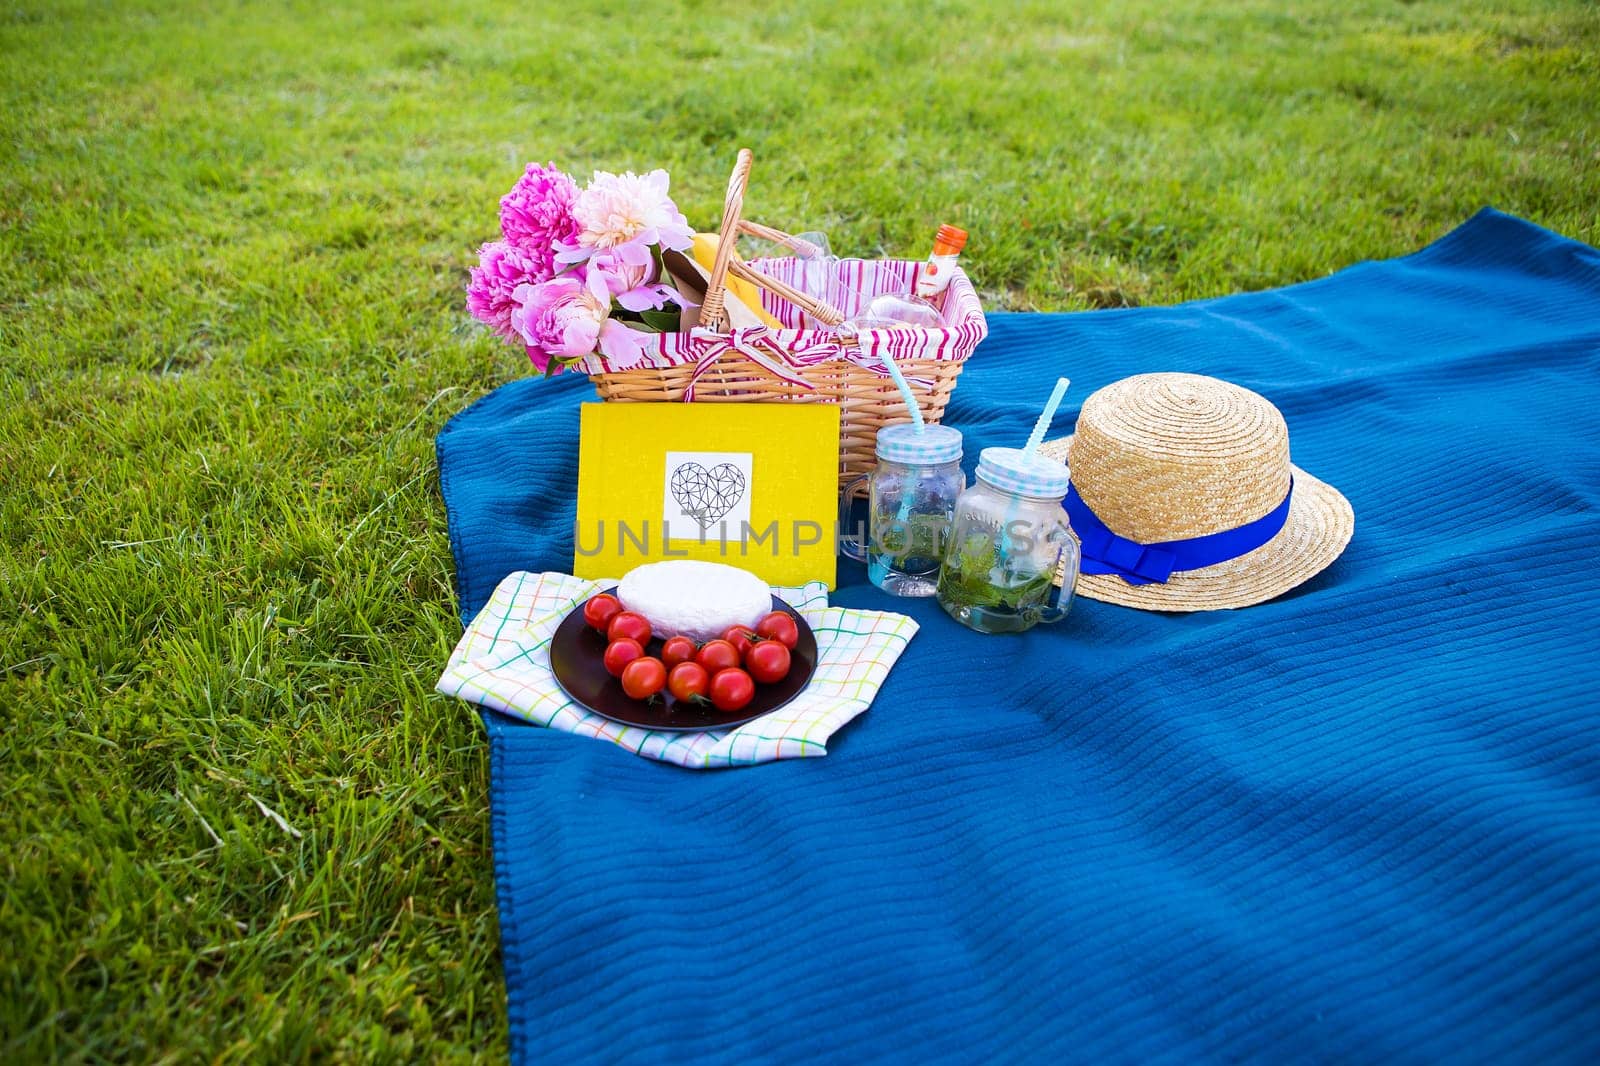 Beautiful flowers in a basket and yellow album lie on the grass-bright picnic